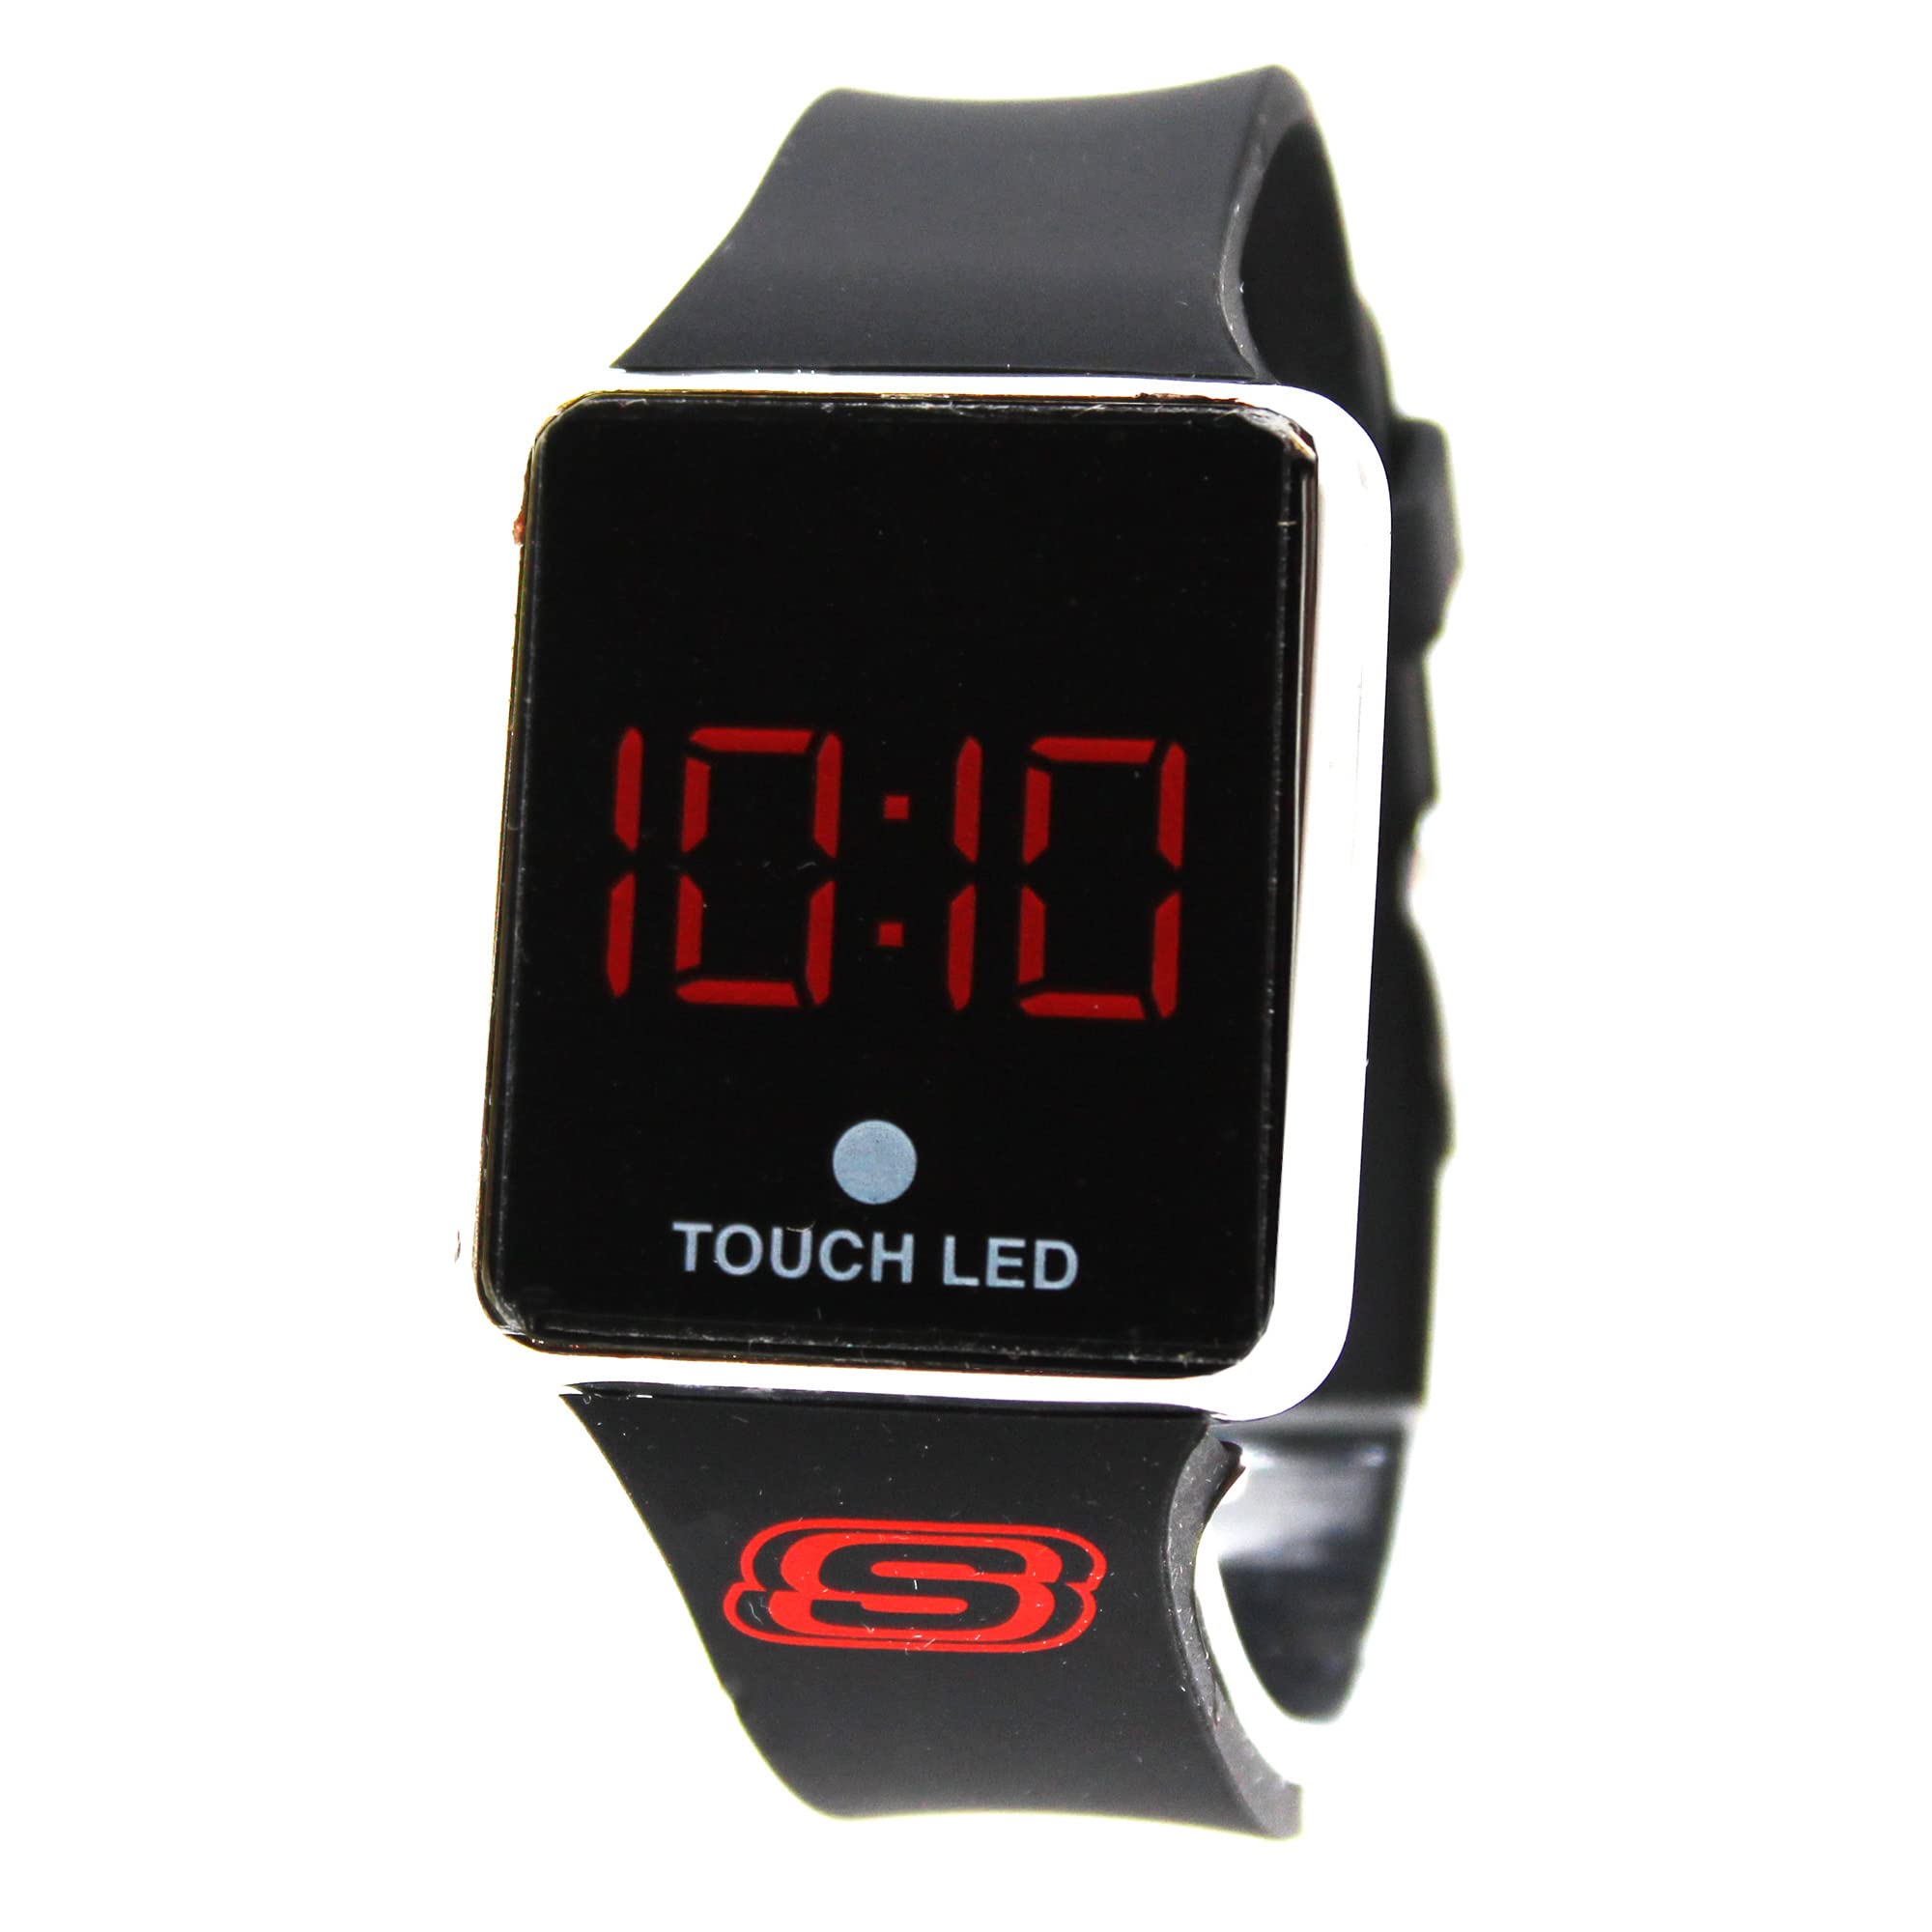 Accutime Skechers Black Digital Touch Quartz Watch with Red Digital Display, Silver-Tone Bezel, and Black Silicone Strap for Boys, Girls, Toddlers, All Ages (Model: SKE4021AZ)